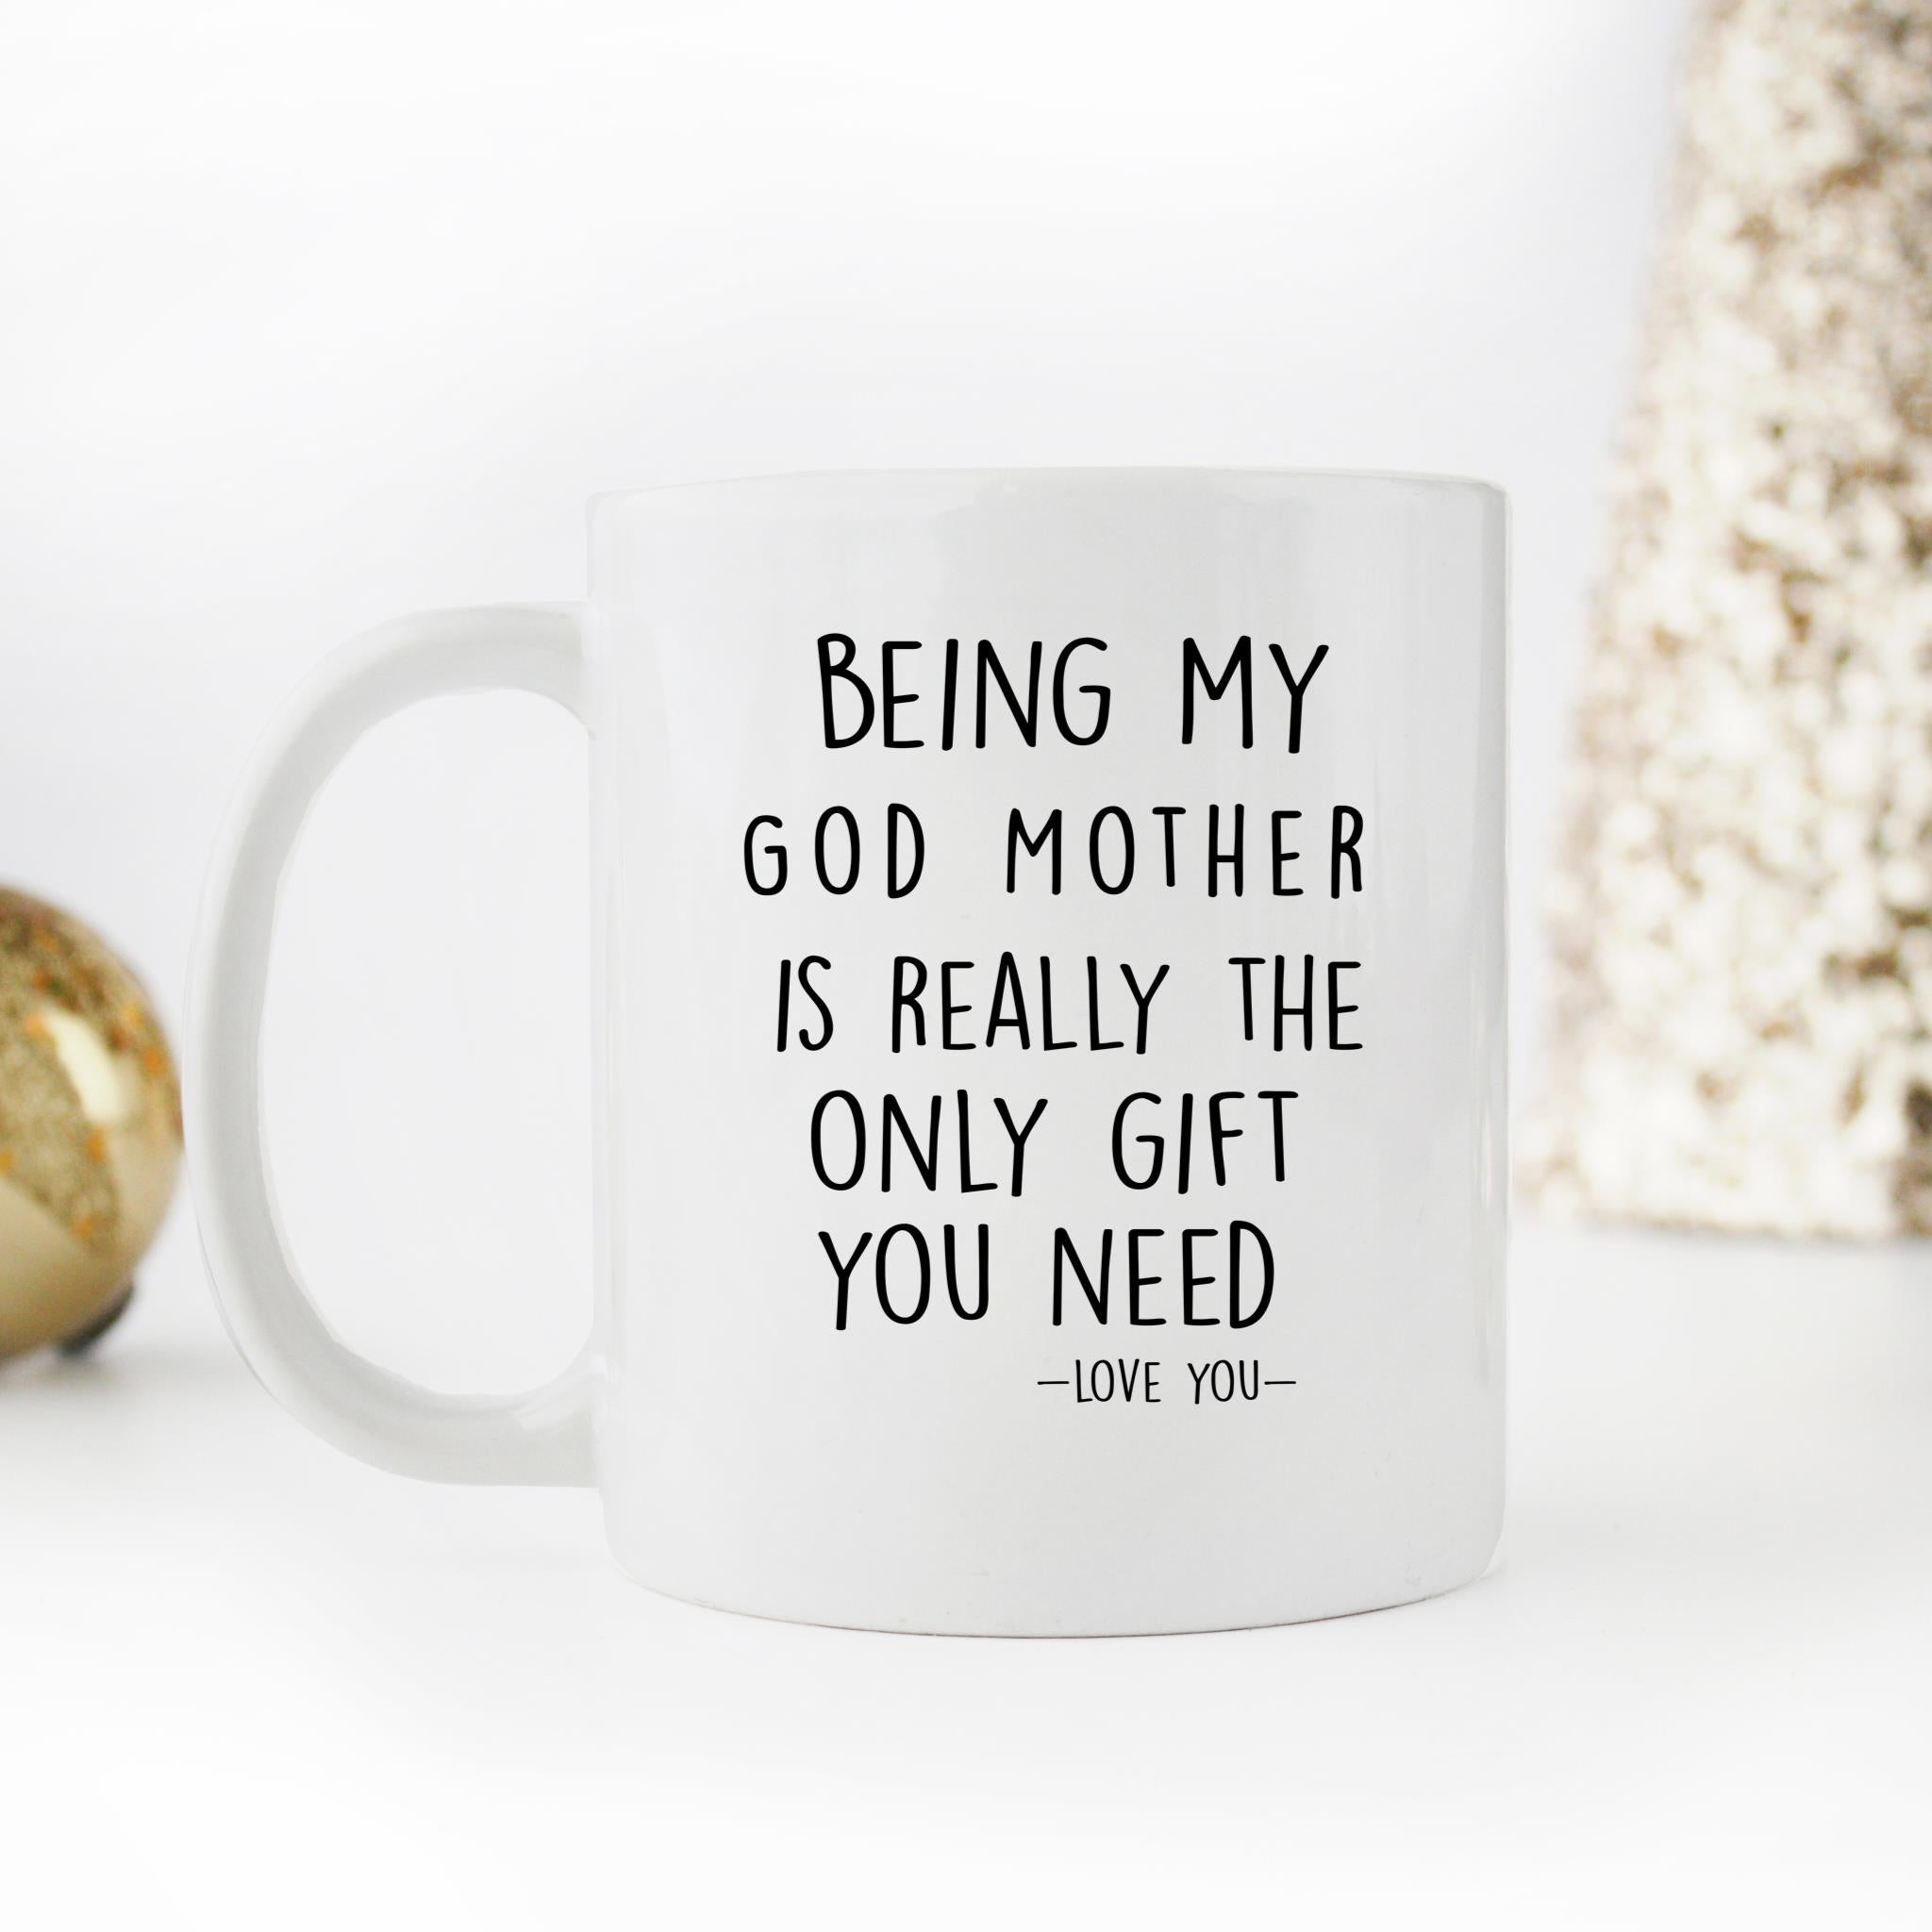 Skitongifts Funny Ceramic Novelty Coffee Mug Being My God Mother Is Really The Only Gift You Need - Love You God Mother Funny Gift PYklD7b